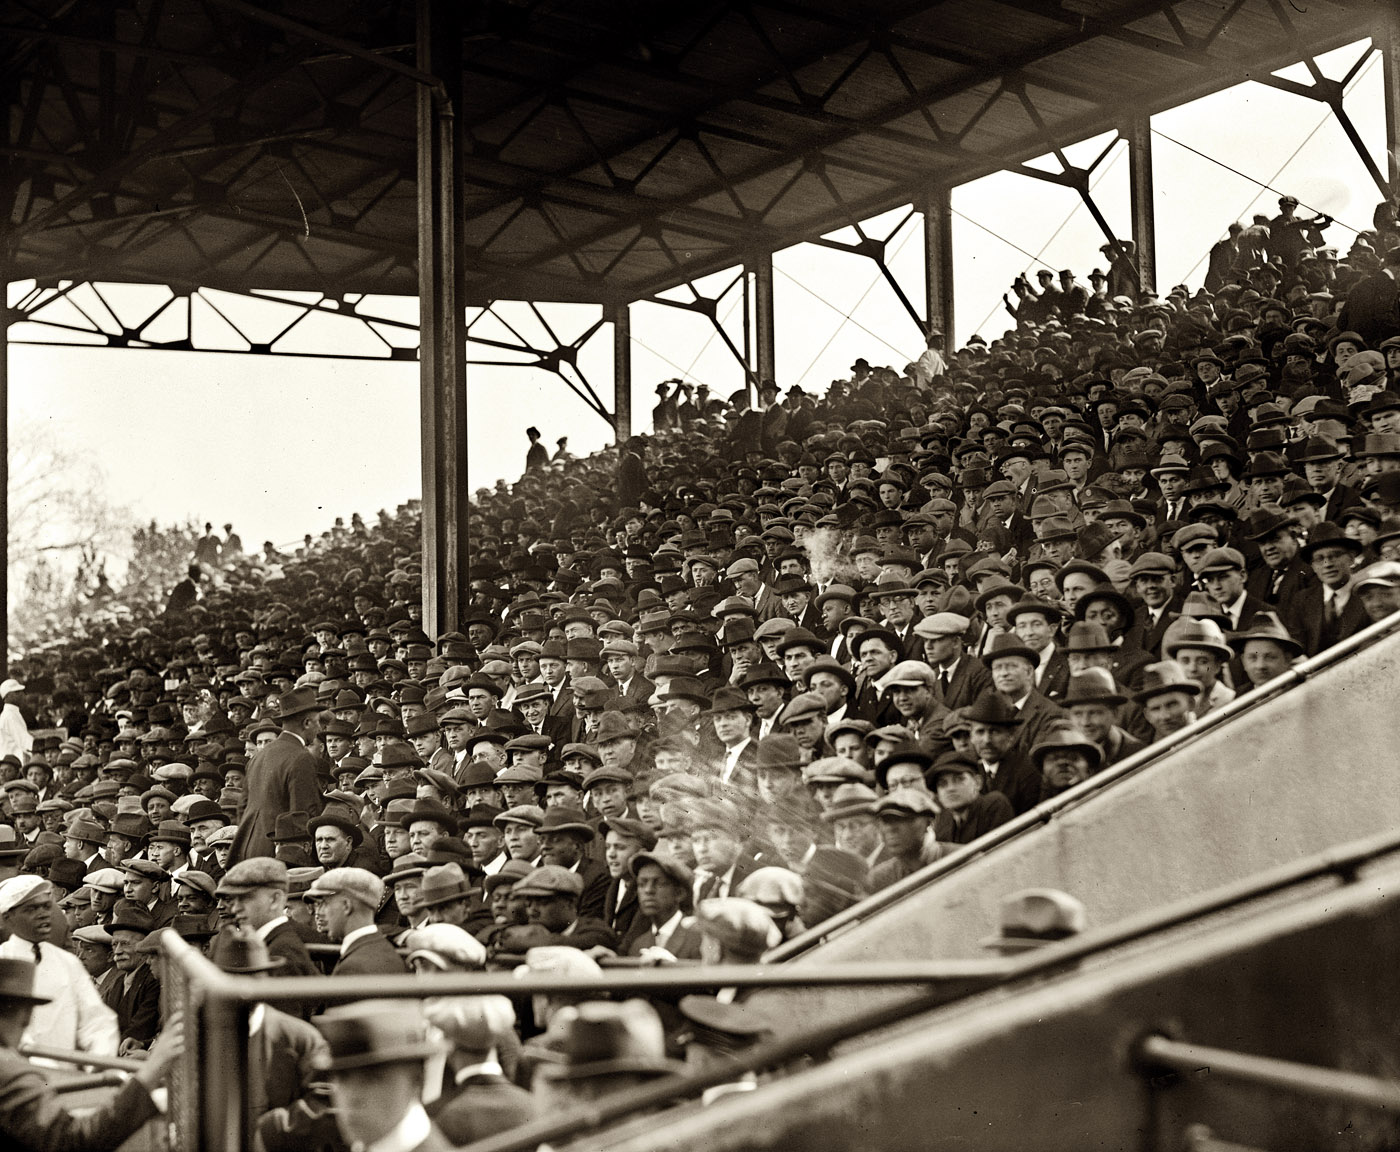 Washington, D.C. "Opening game 1923, Griffith Stadium." View full size. National Photo Company Collection glass negative.